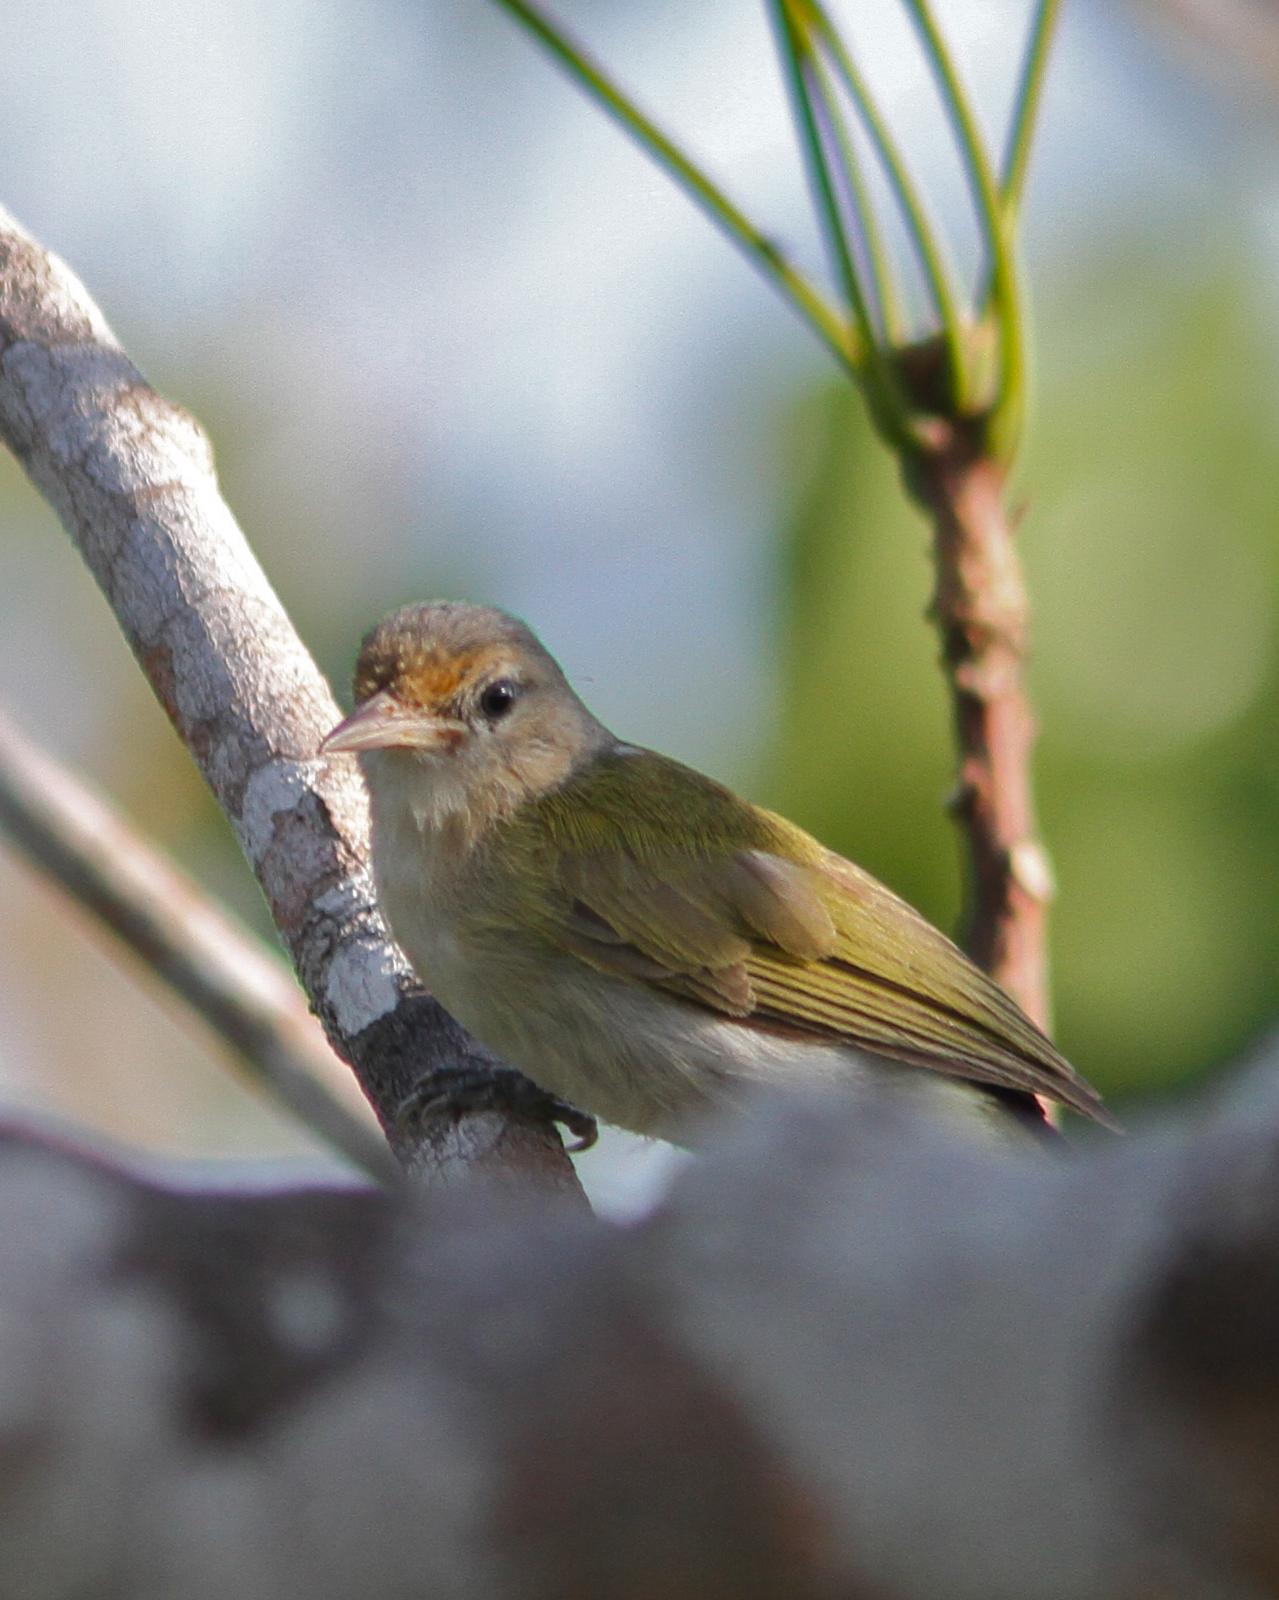 Buff-cheeked Greenlet Photo by Marcelo Padua